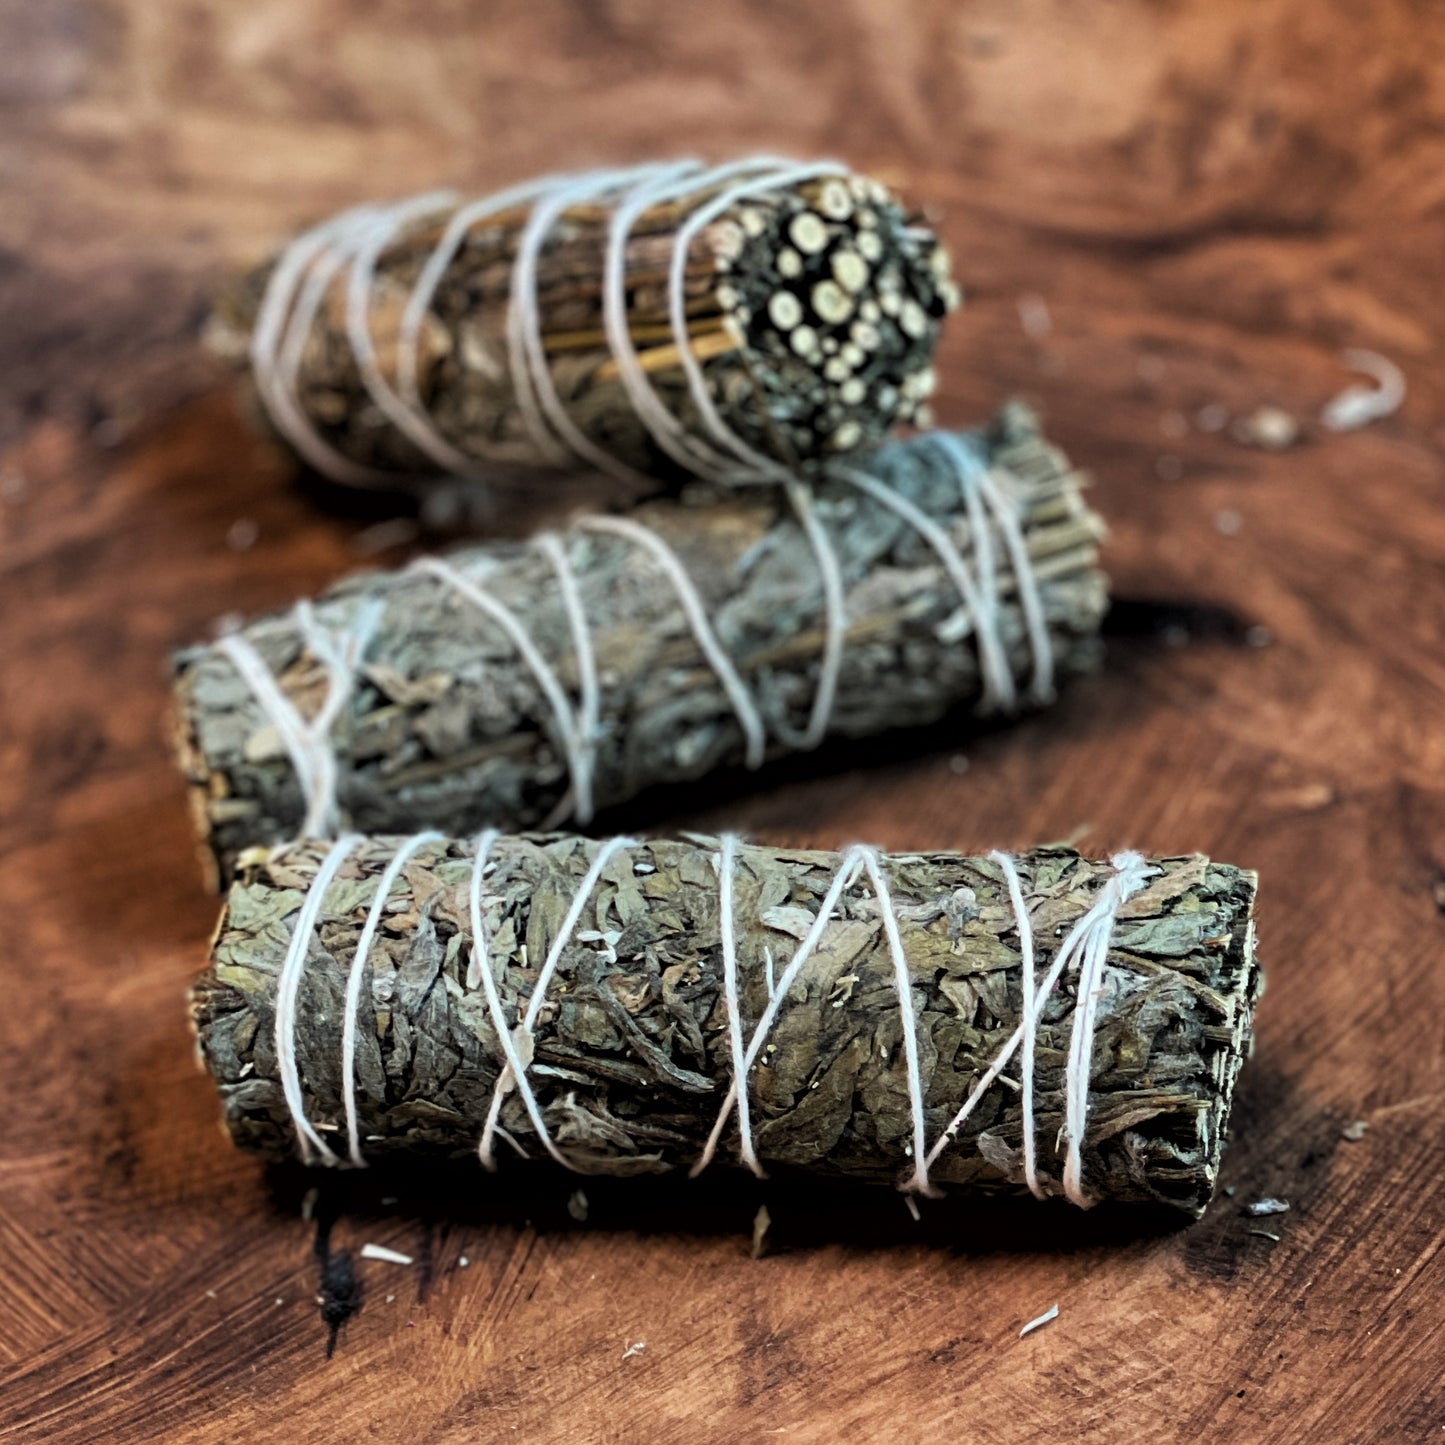 Sweetgrass with White Sage Bundles – Rebecca Graves Pottery